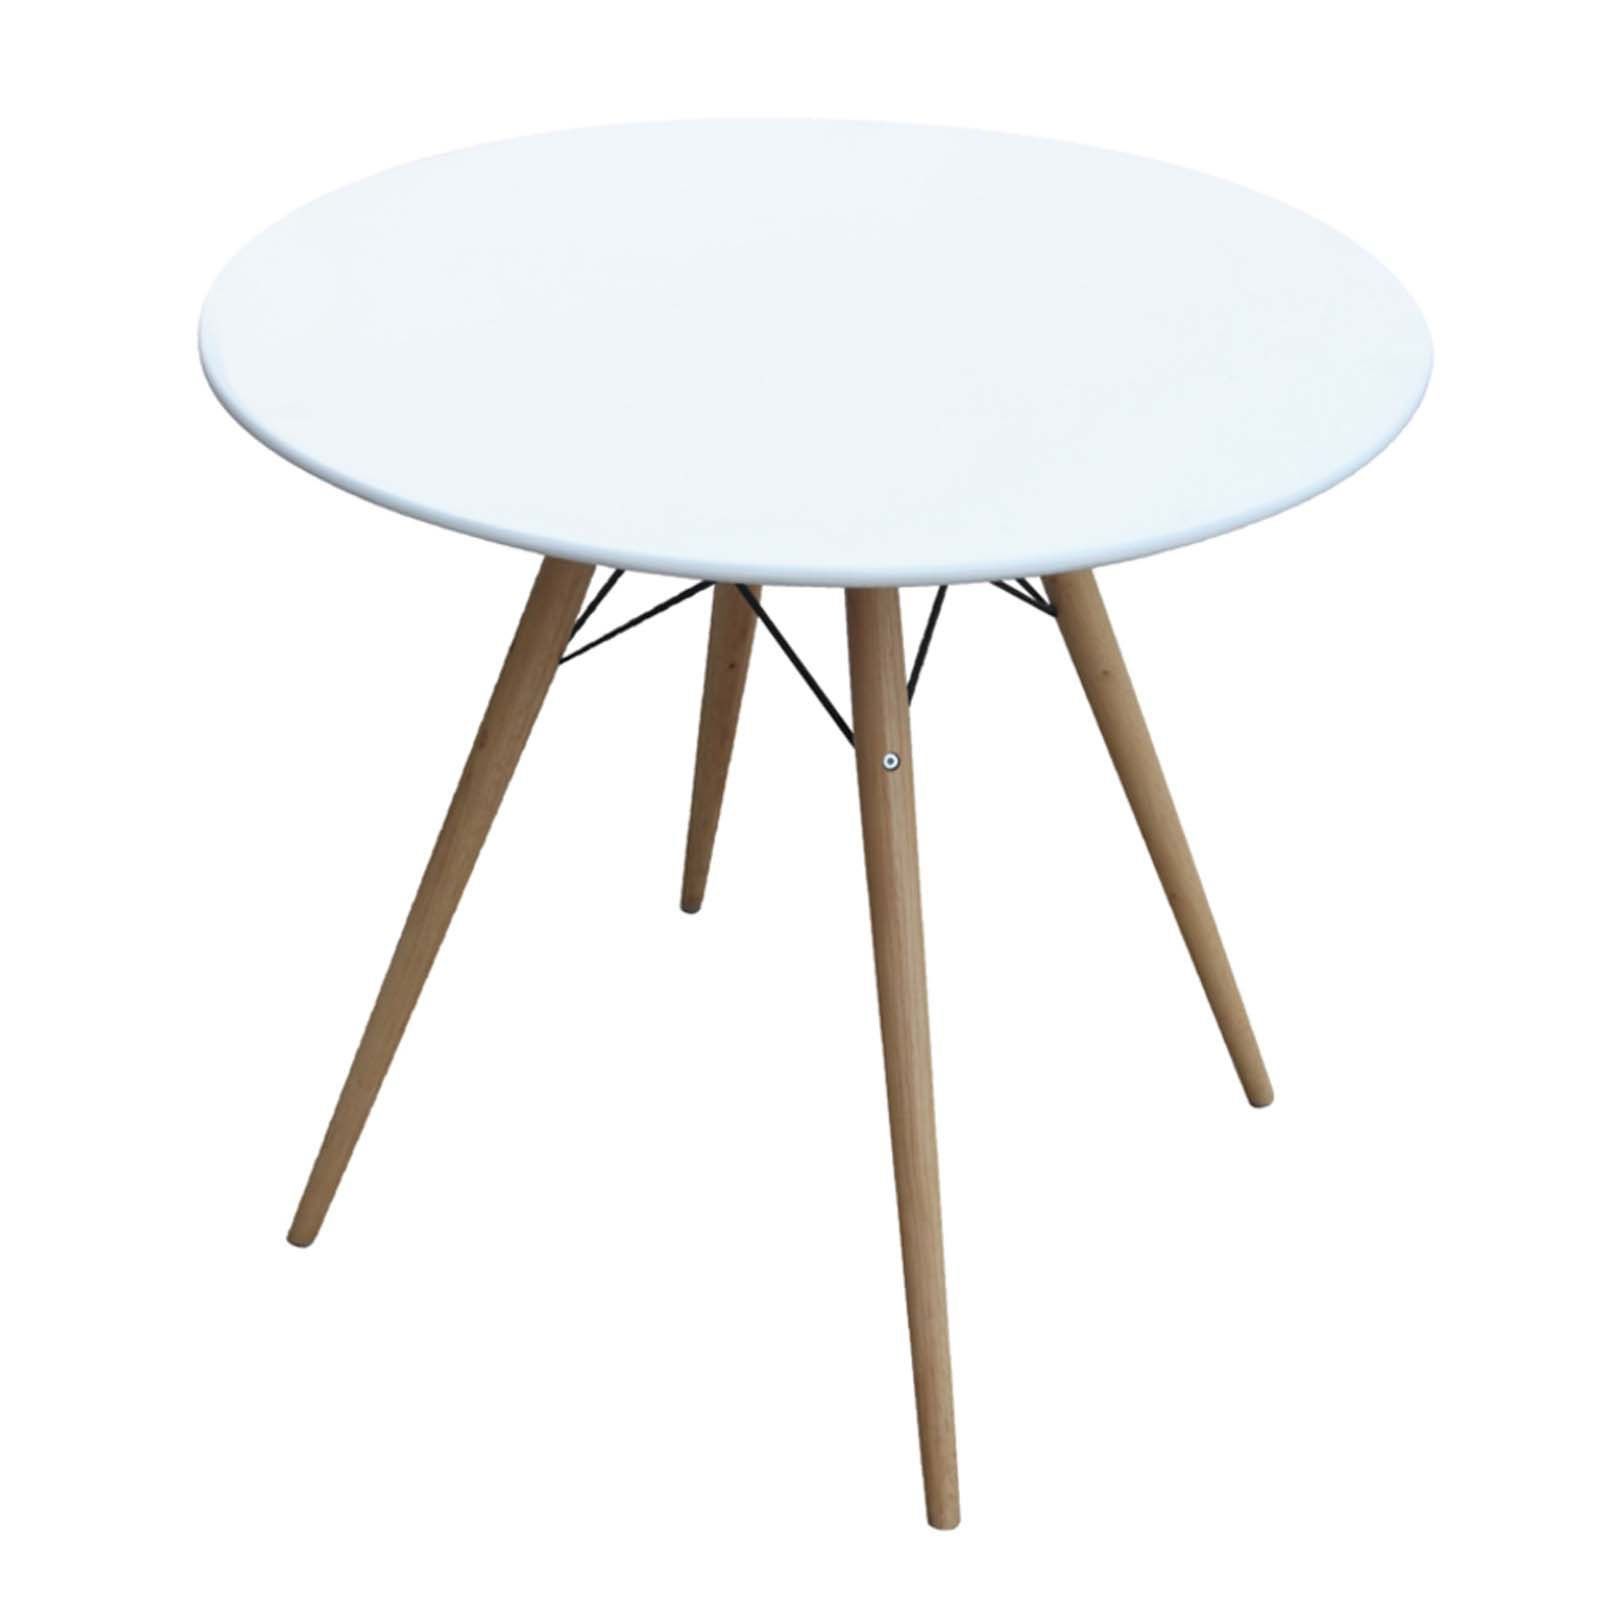 Fashionable Woodleg 36" Fiberglass Top Dining Table, White Pertaining To Menifee 36'' Dining Tables (View 3 of 20)